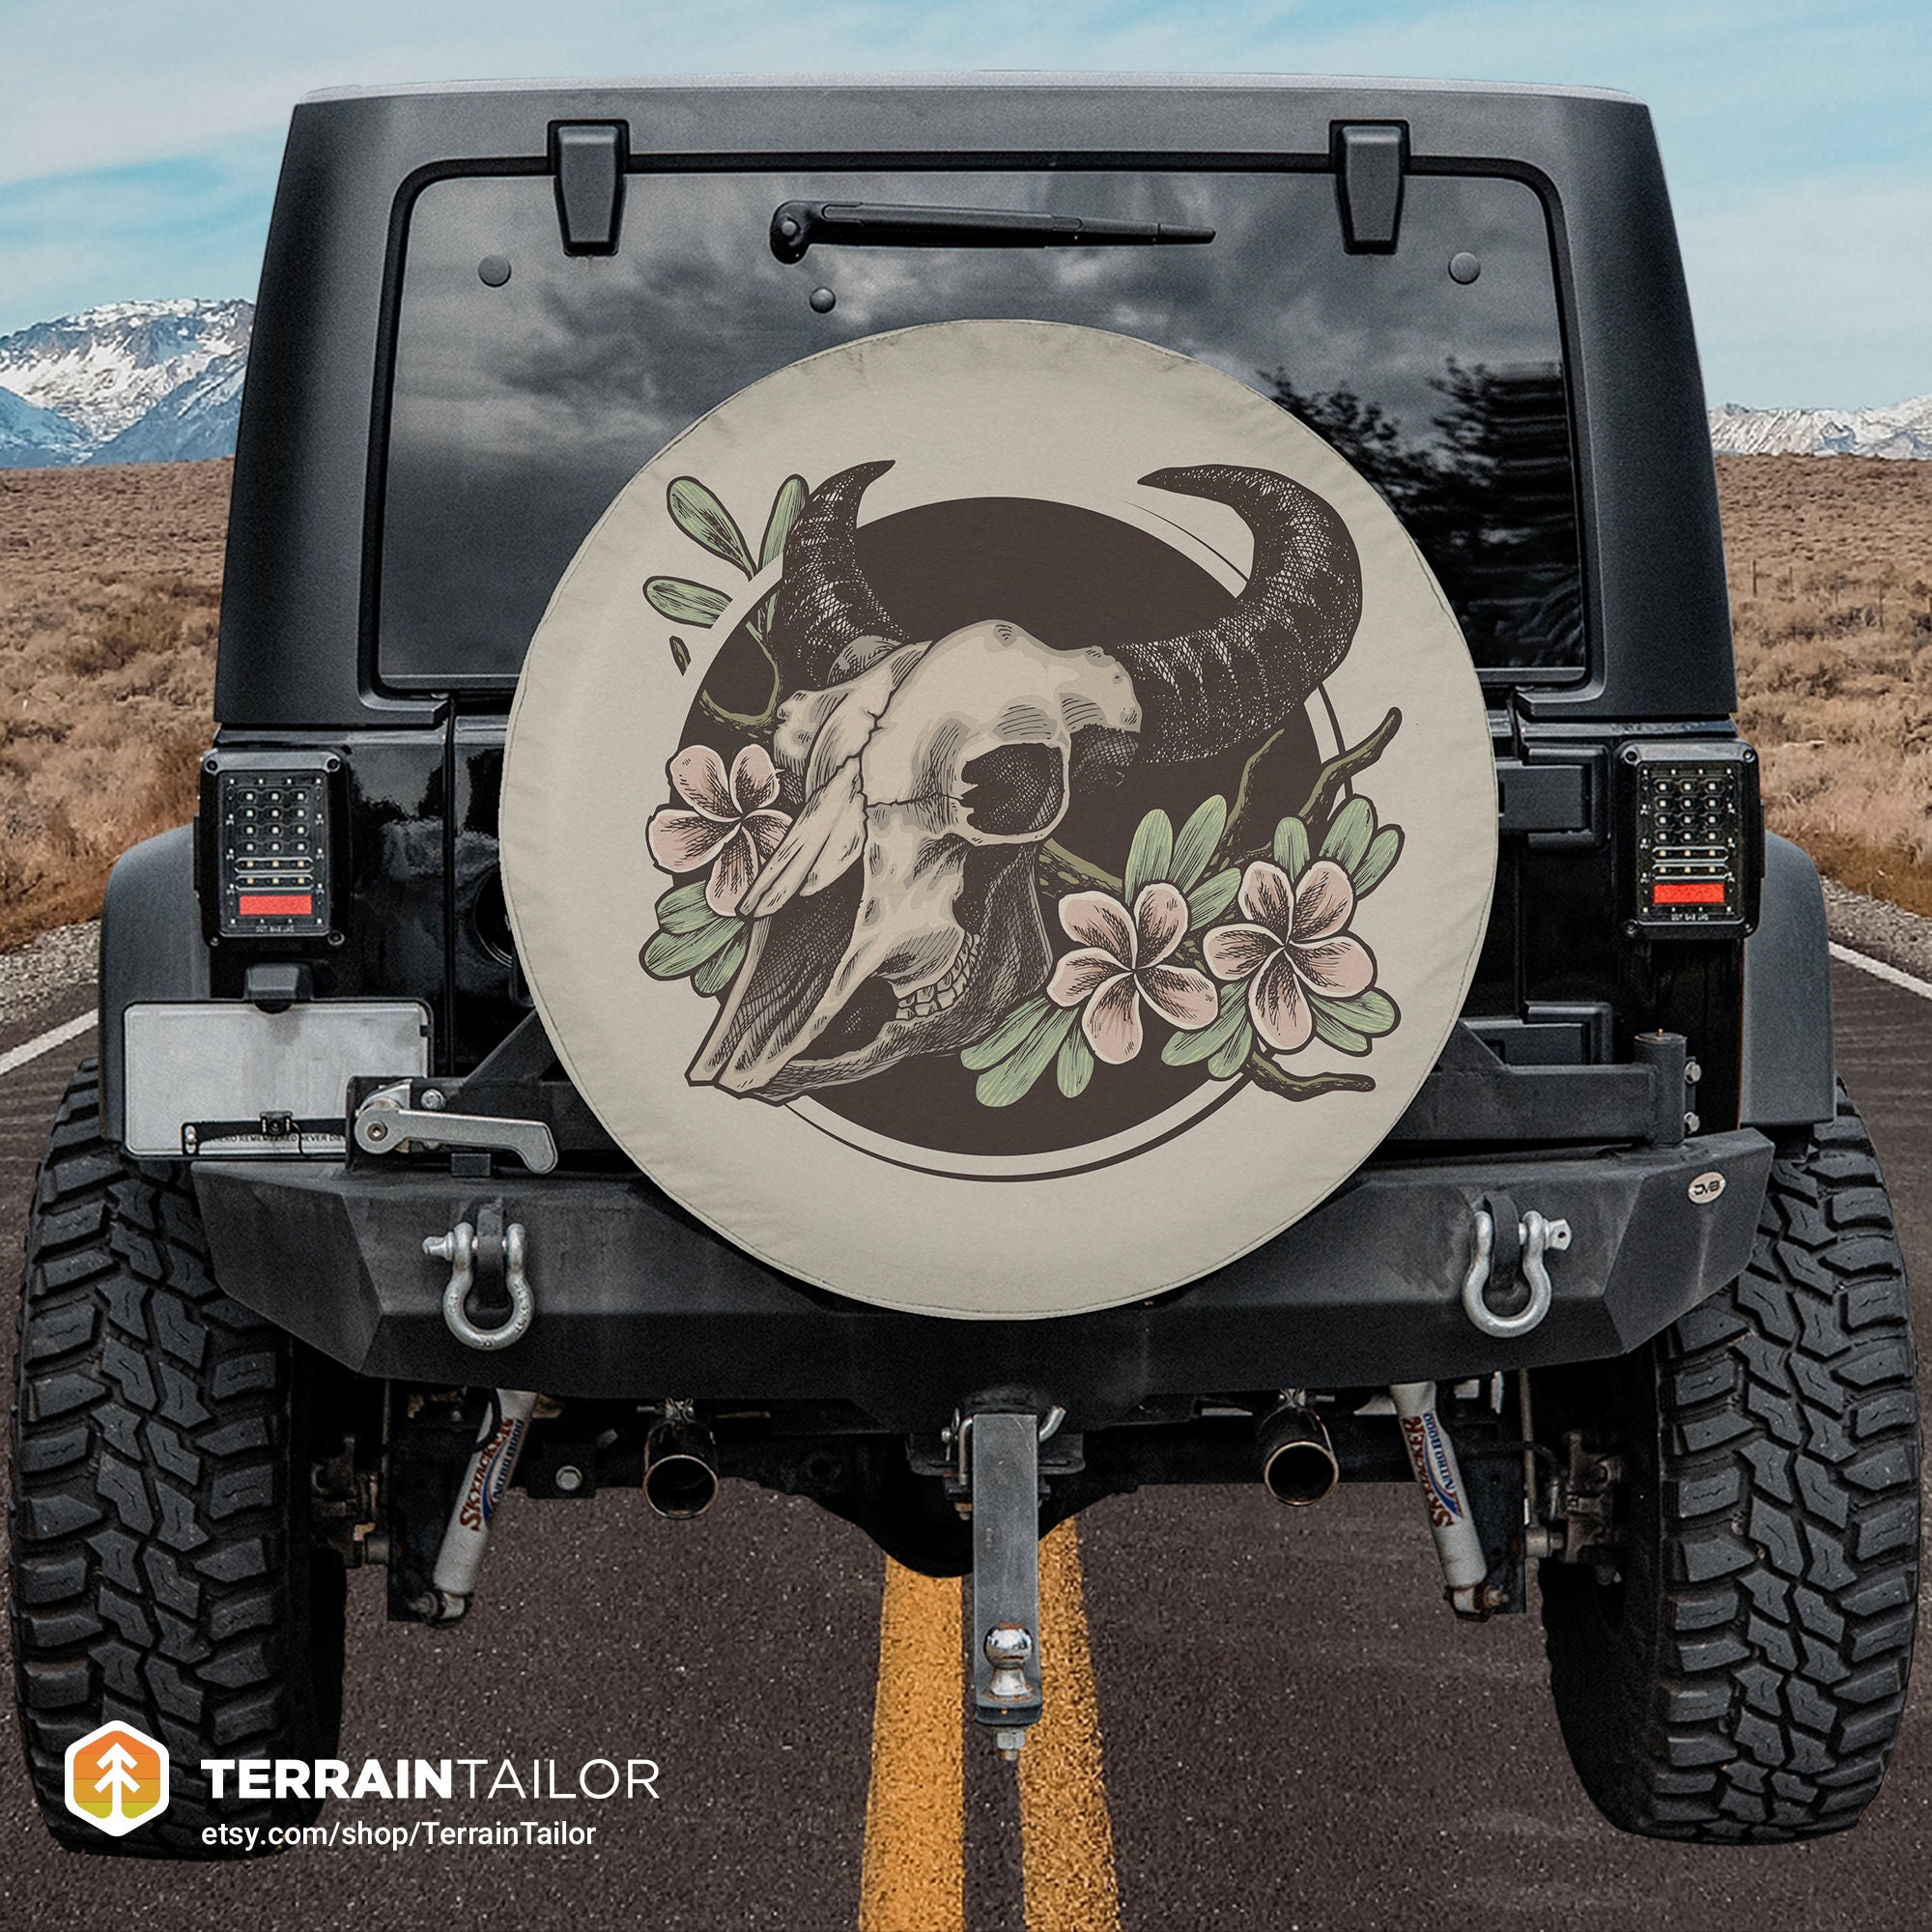 Spare Tire Cover, Girly Tire Cover, Cool Accessories, Cute Car